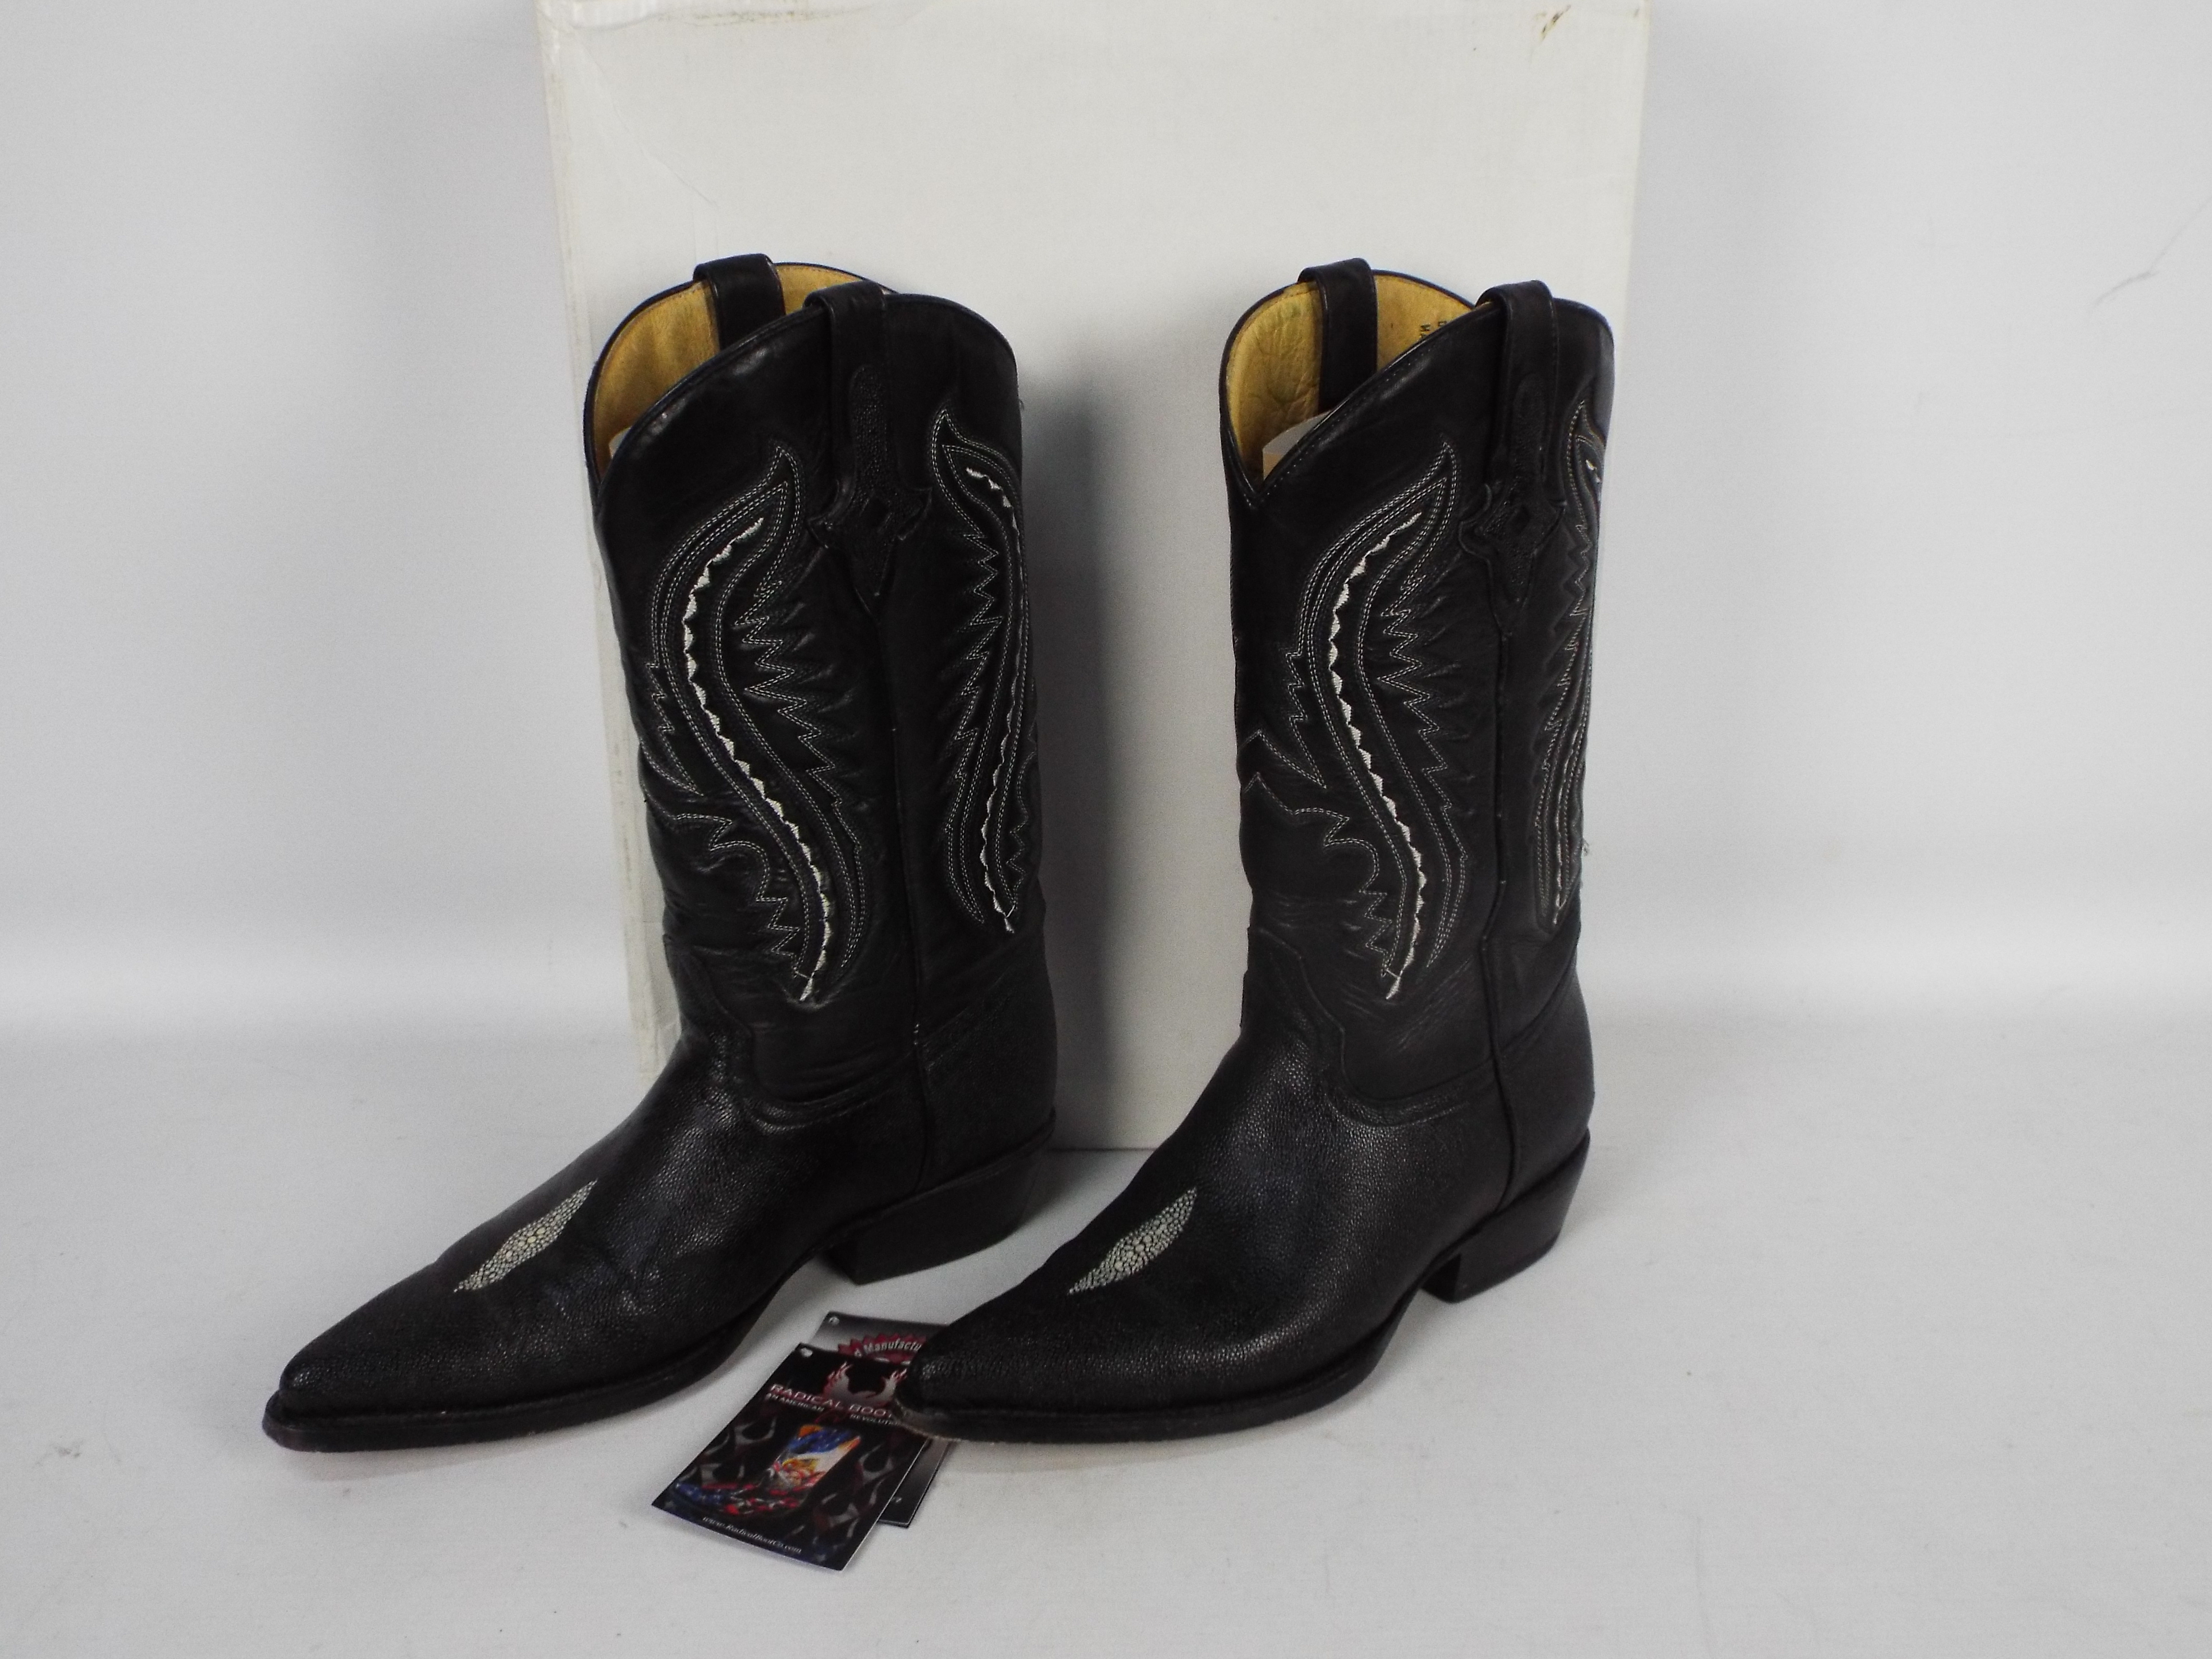 Radical Boot Co - a pair of Stingray black boots # 54W, special western boots, UK size 6, US size 7.